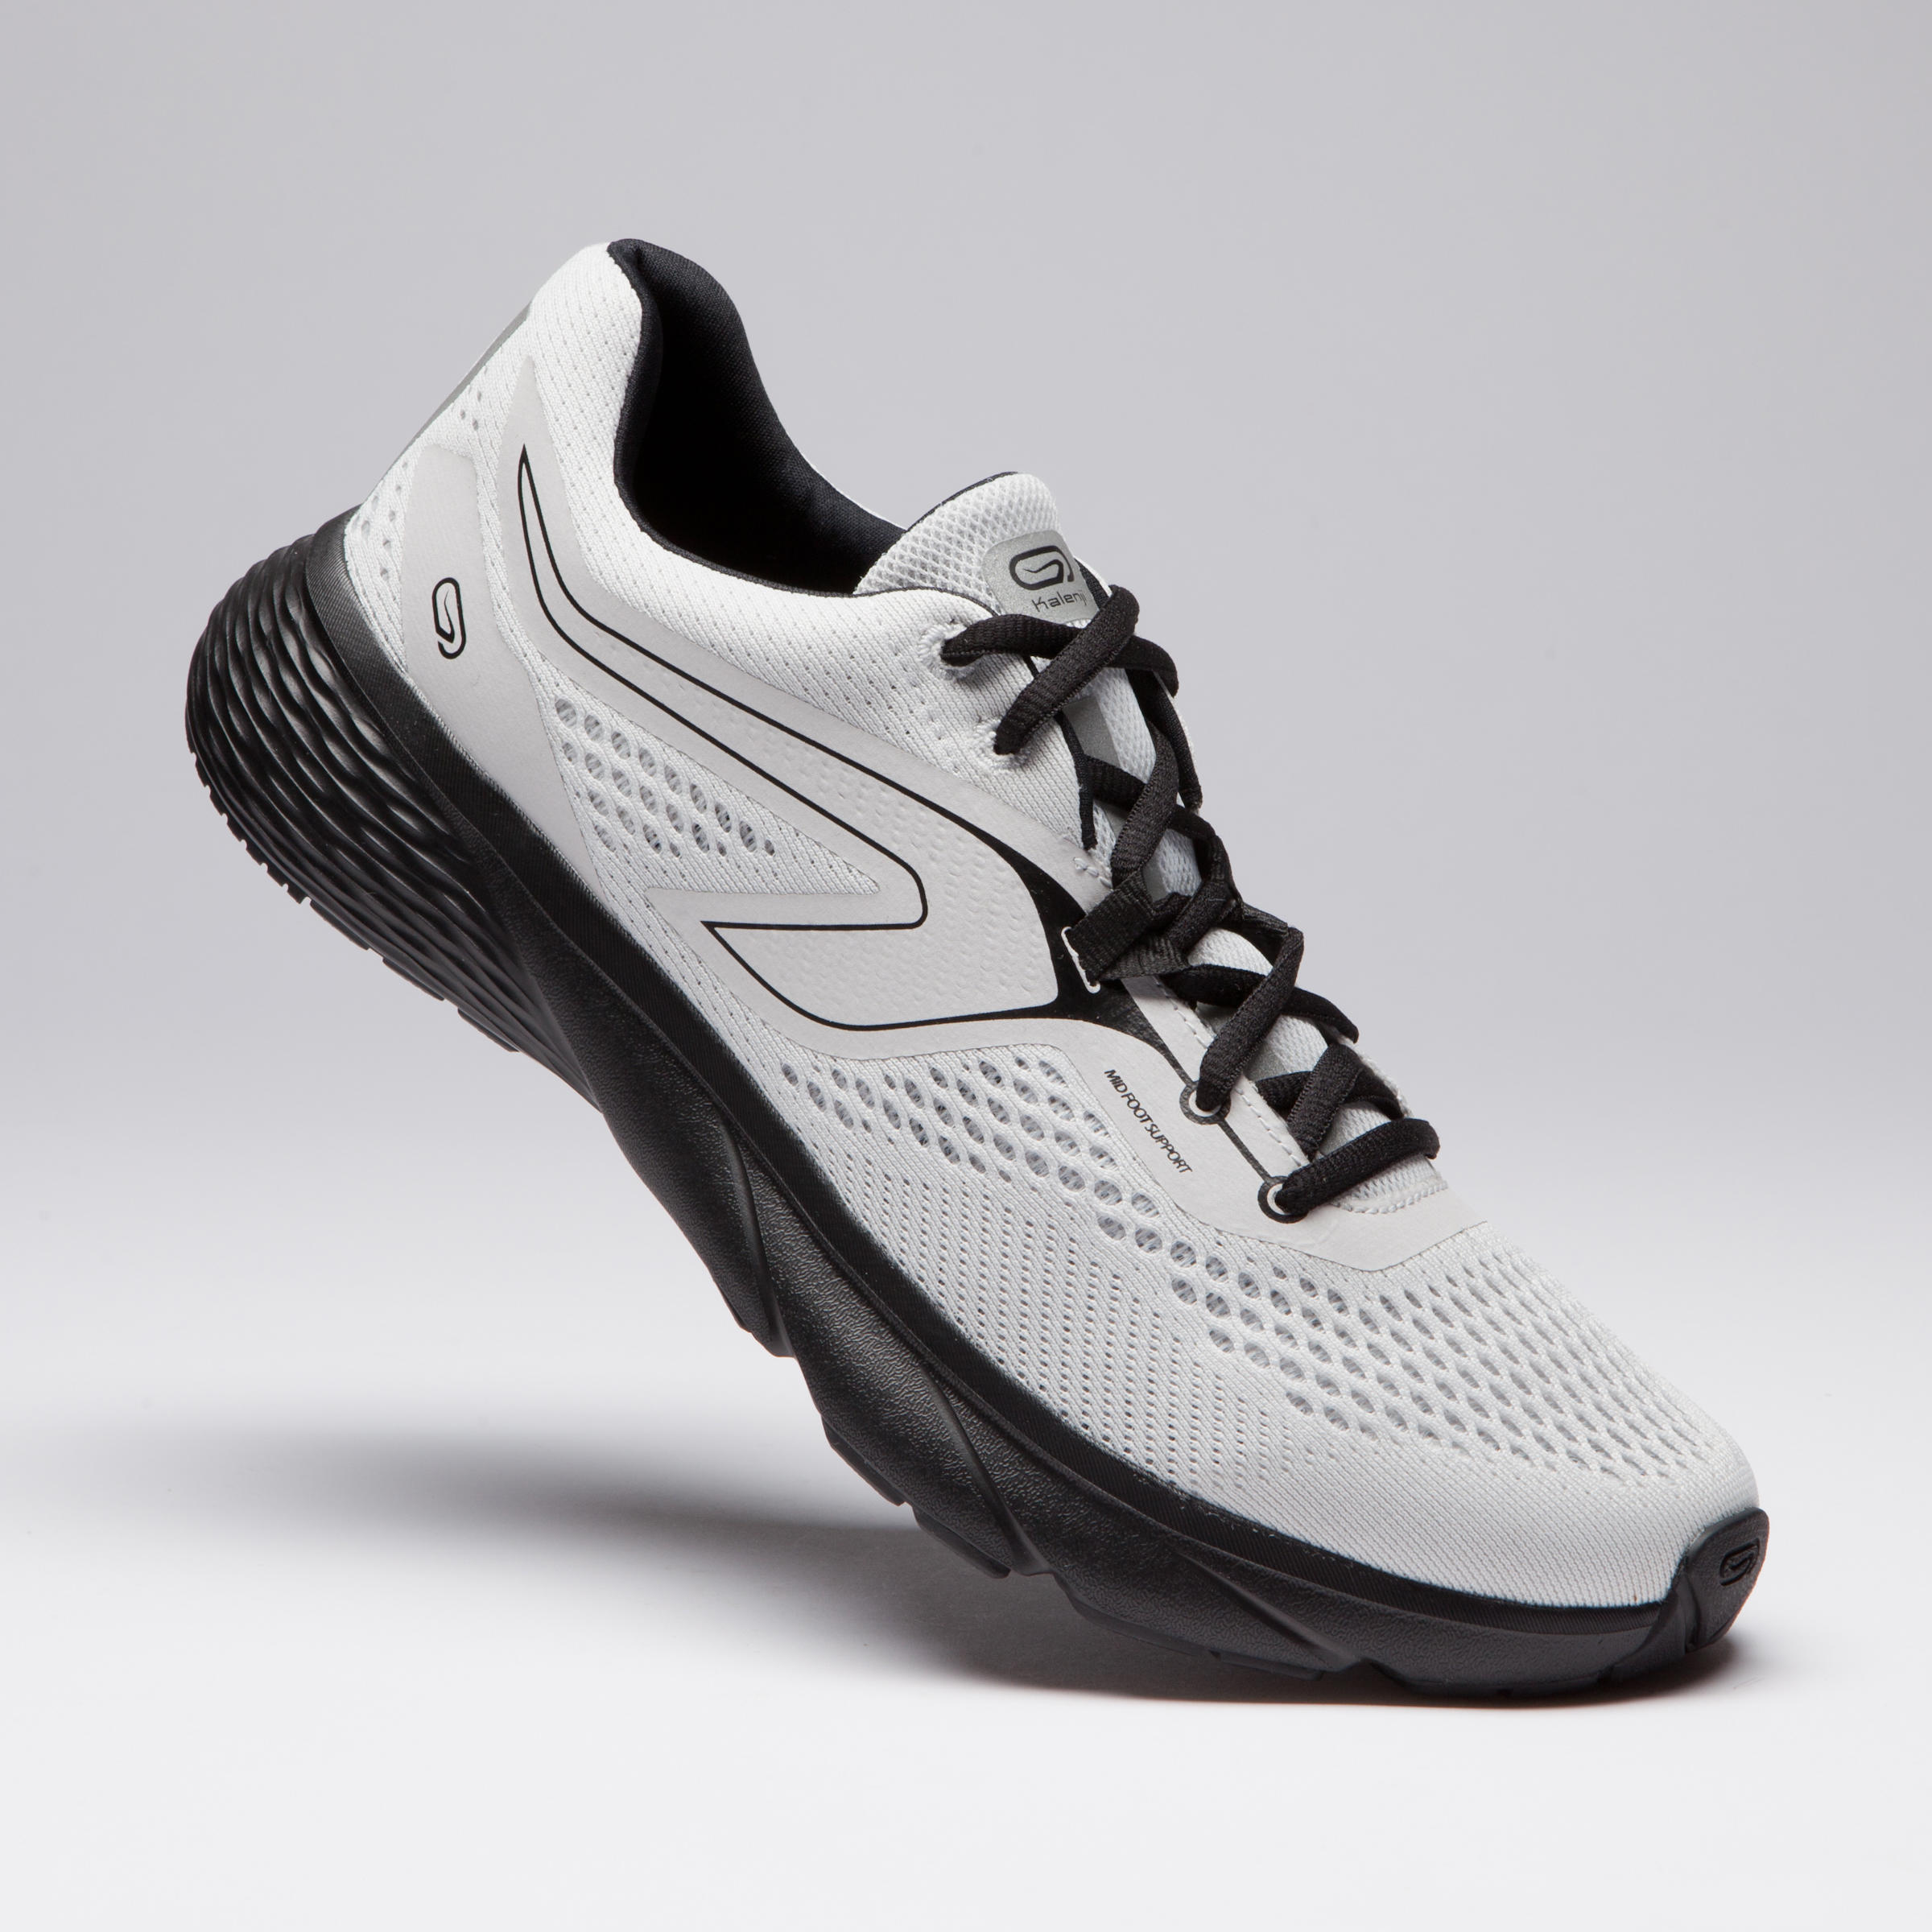 support running shoes mens